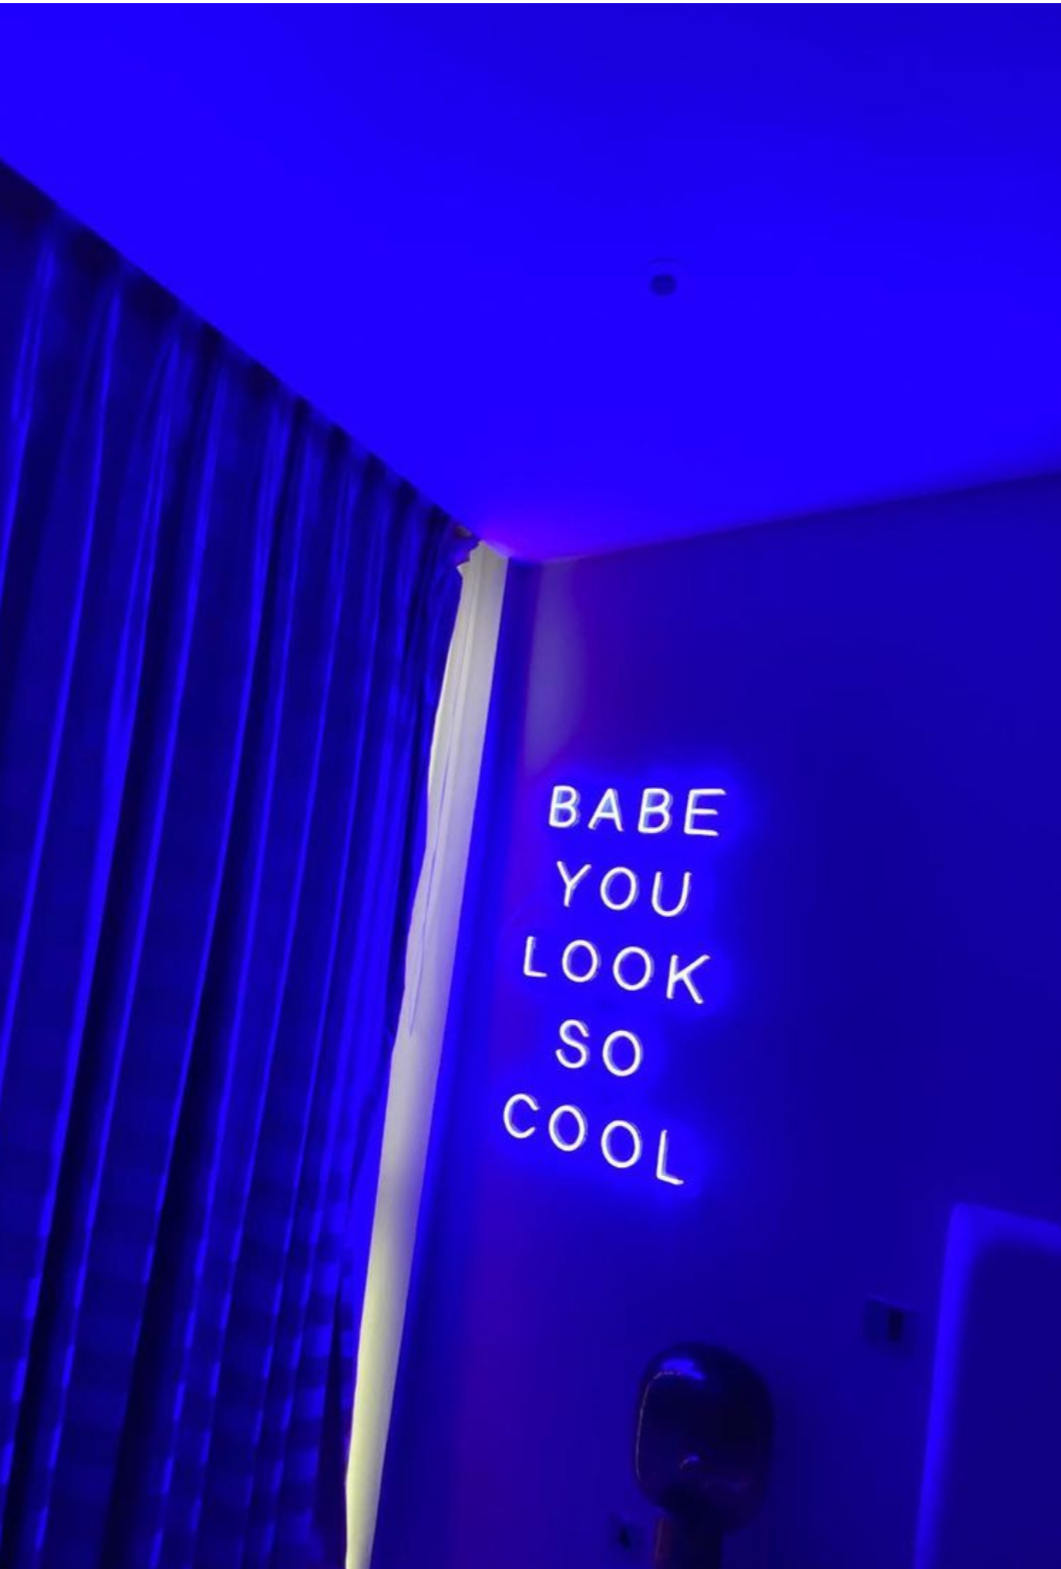 Babe You Look So Cool 2 LED Neon Light Sign